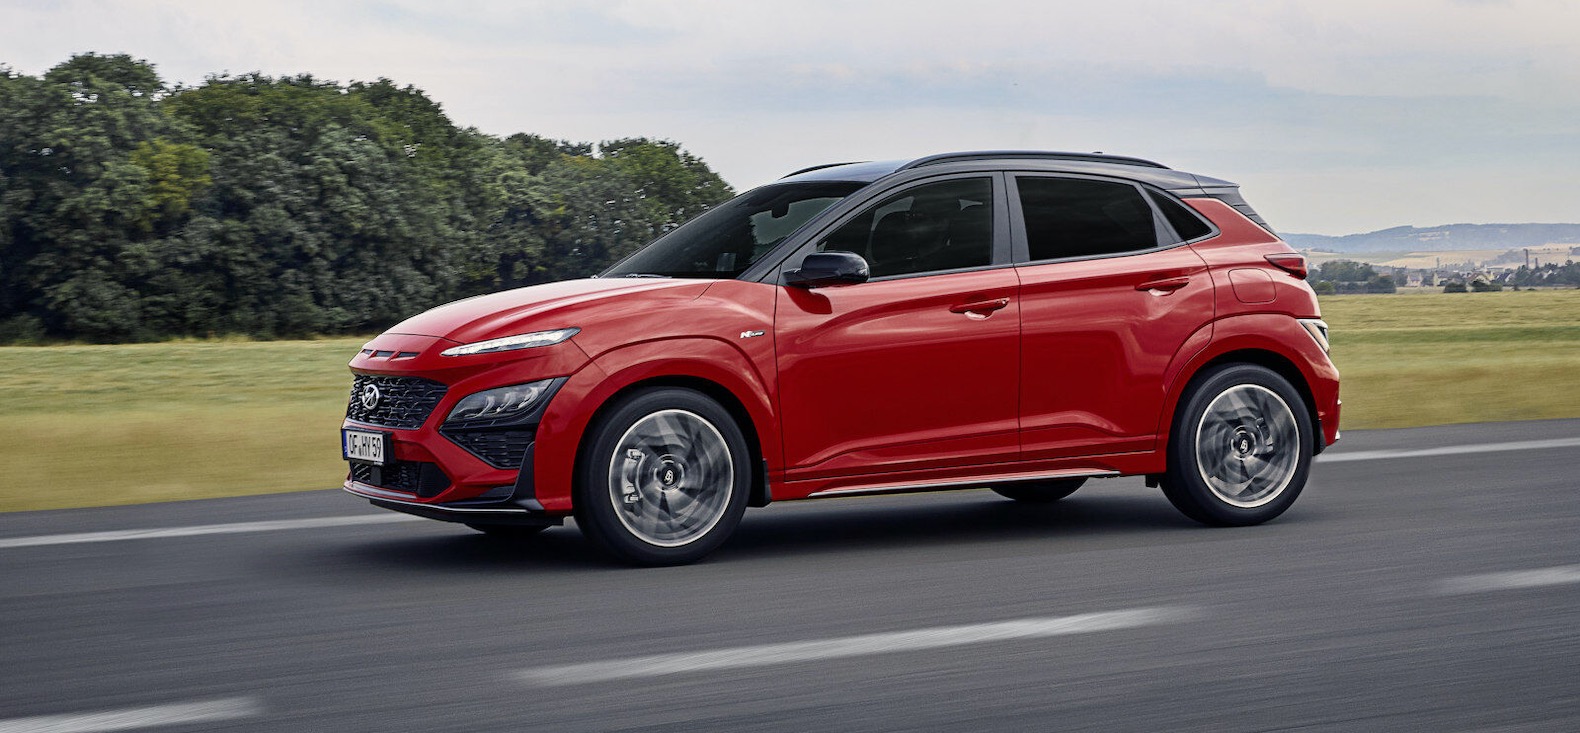 2022 Hyundai Kona gets a new face and a sportier N-Line ...